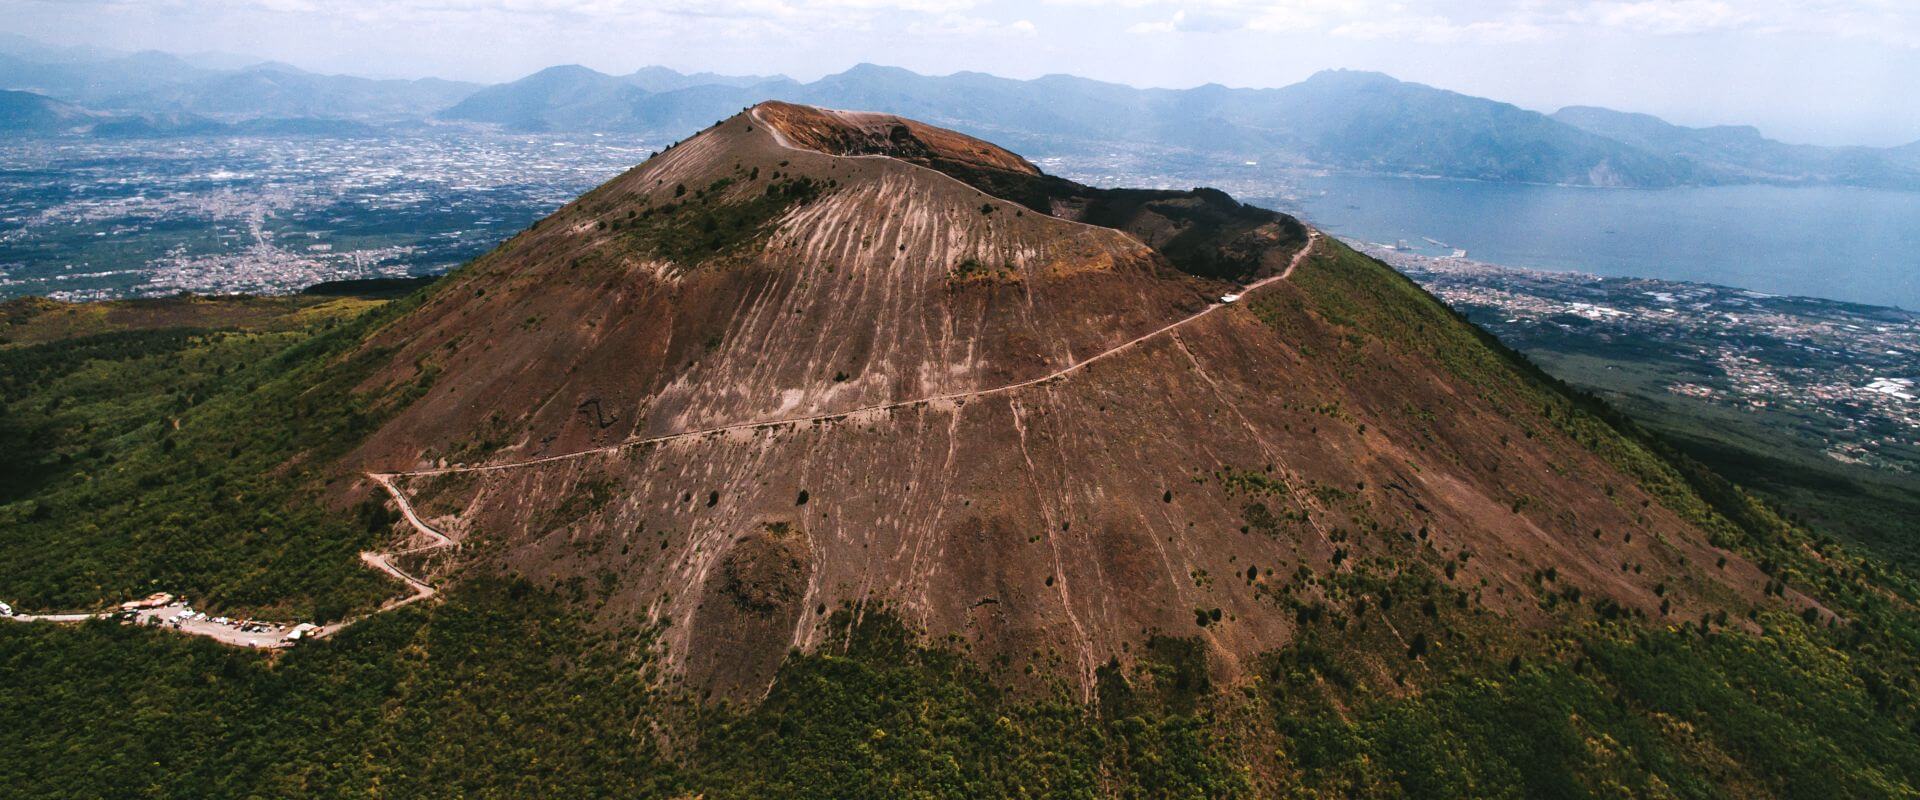 Vesuvius in Italy, view from the top